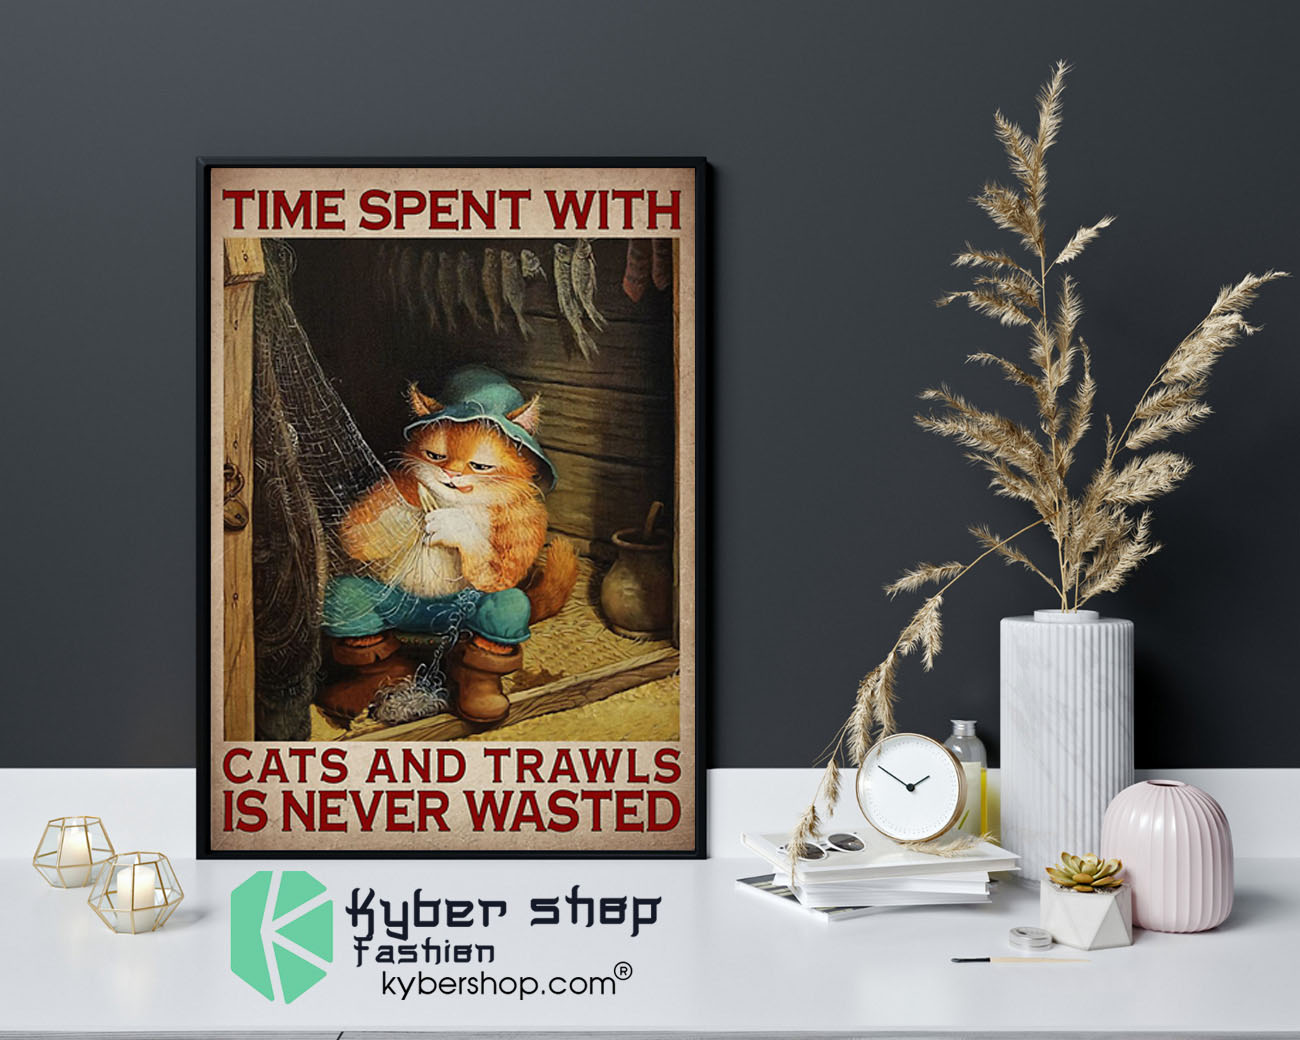 Time spent with cats and trawls is never wasted poster